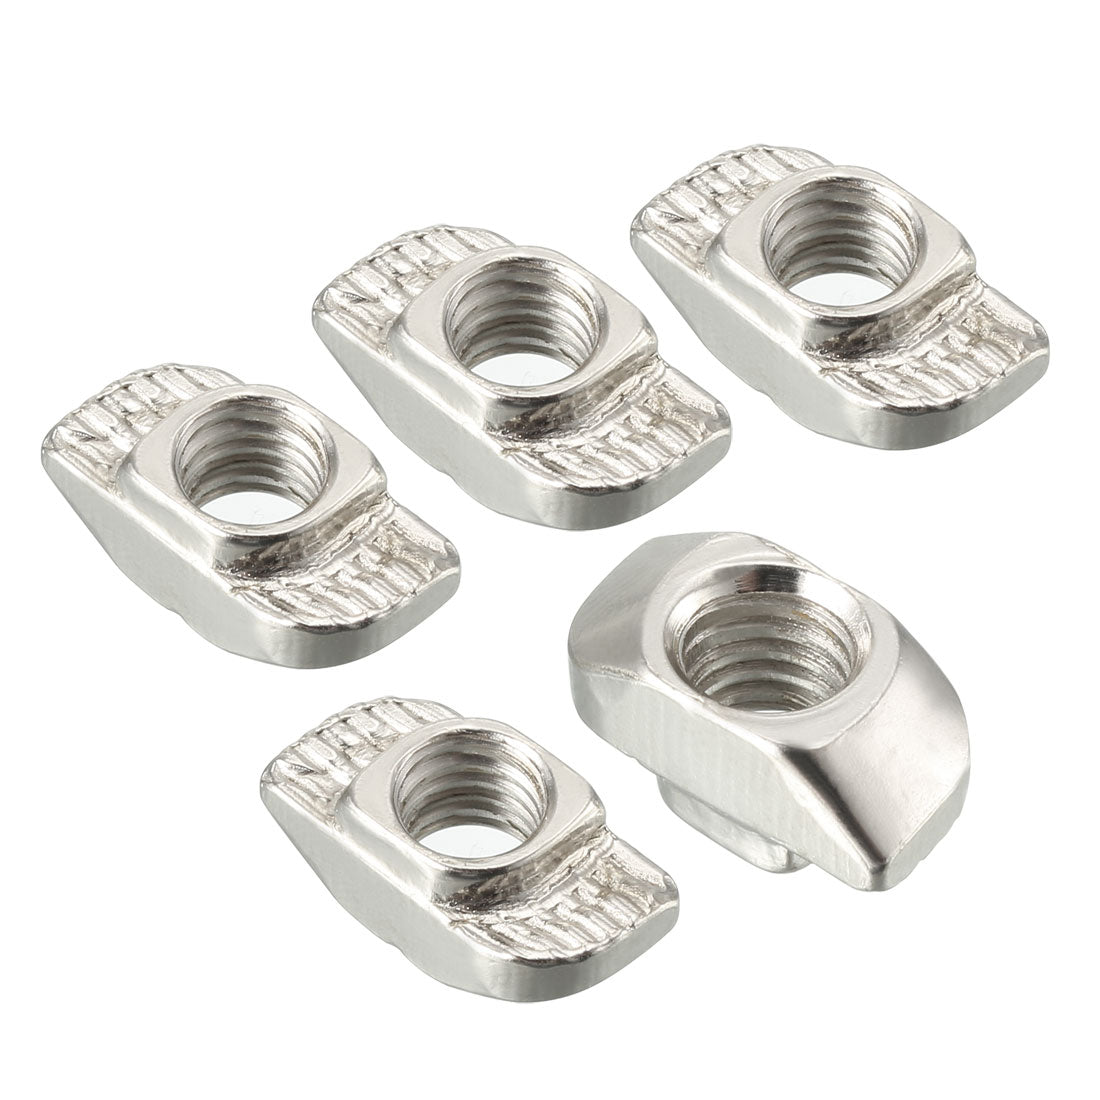 Uxcell Uxcell Sliding T Slot Nuts, M6 Thread for 3030 Series Aluminum Extrusion Profile 10pcs